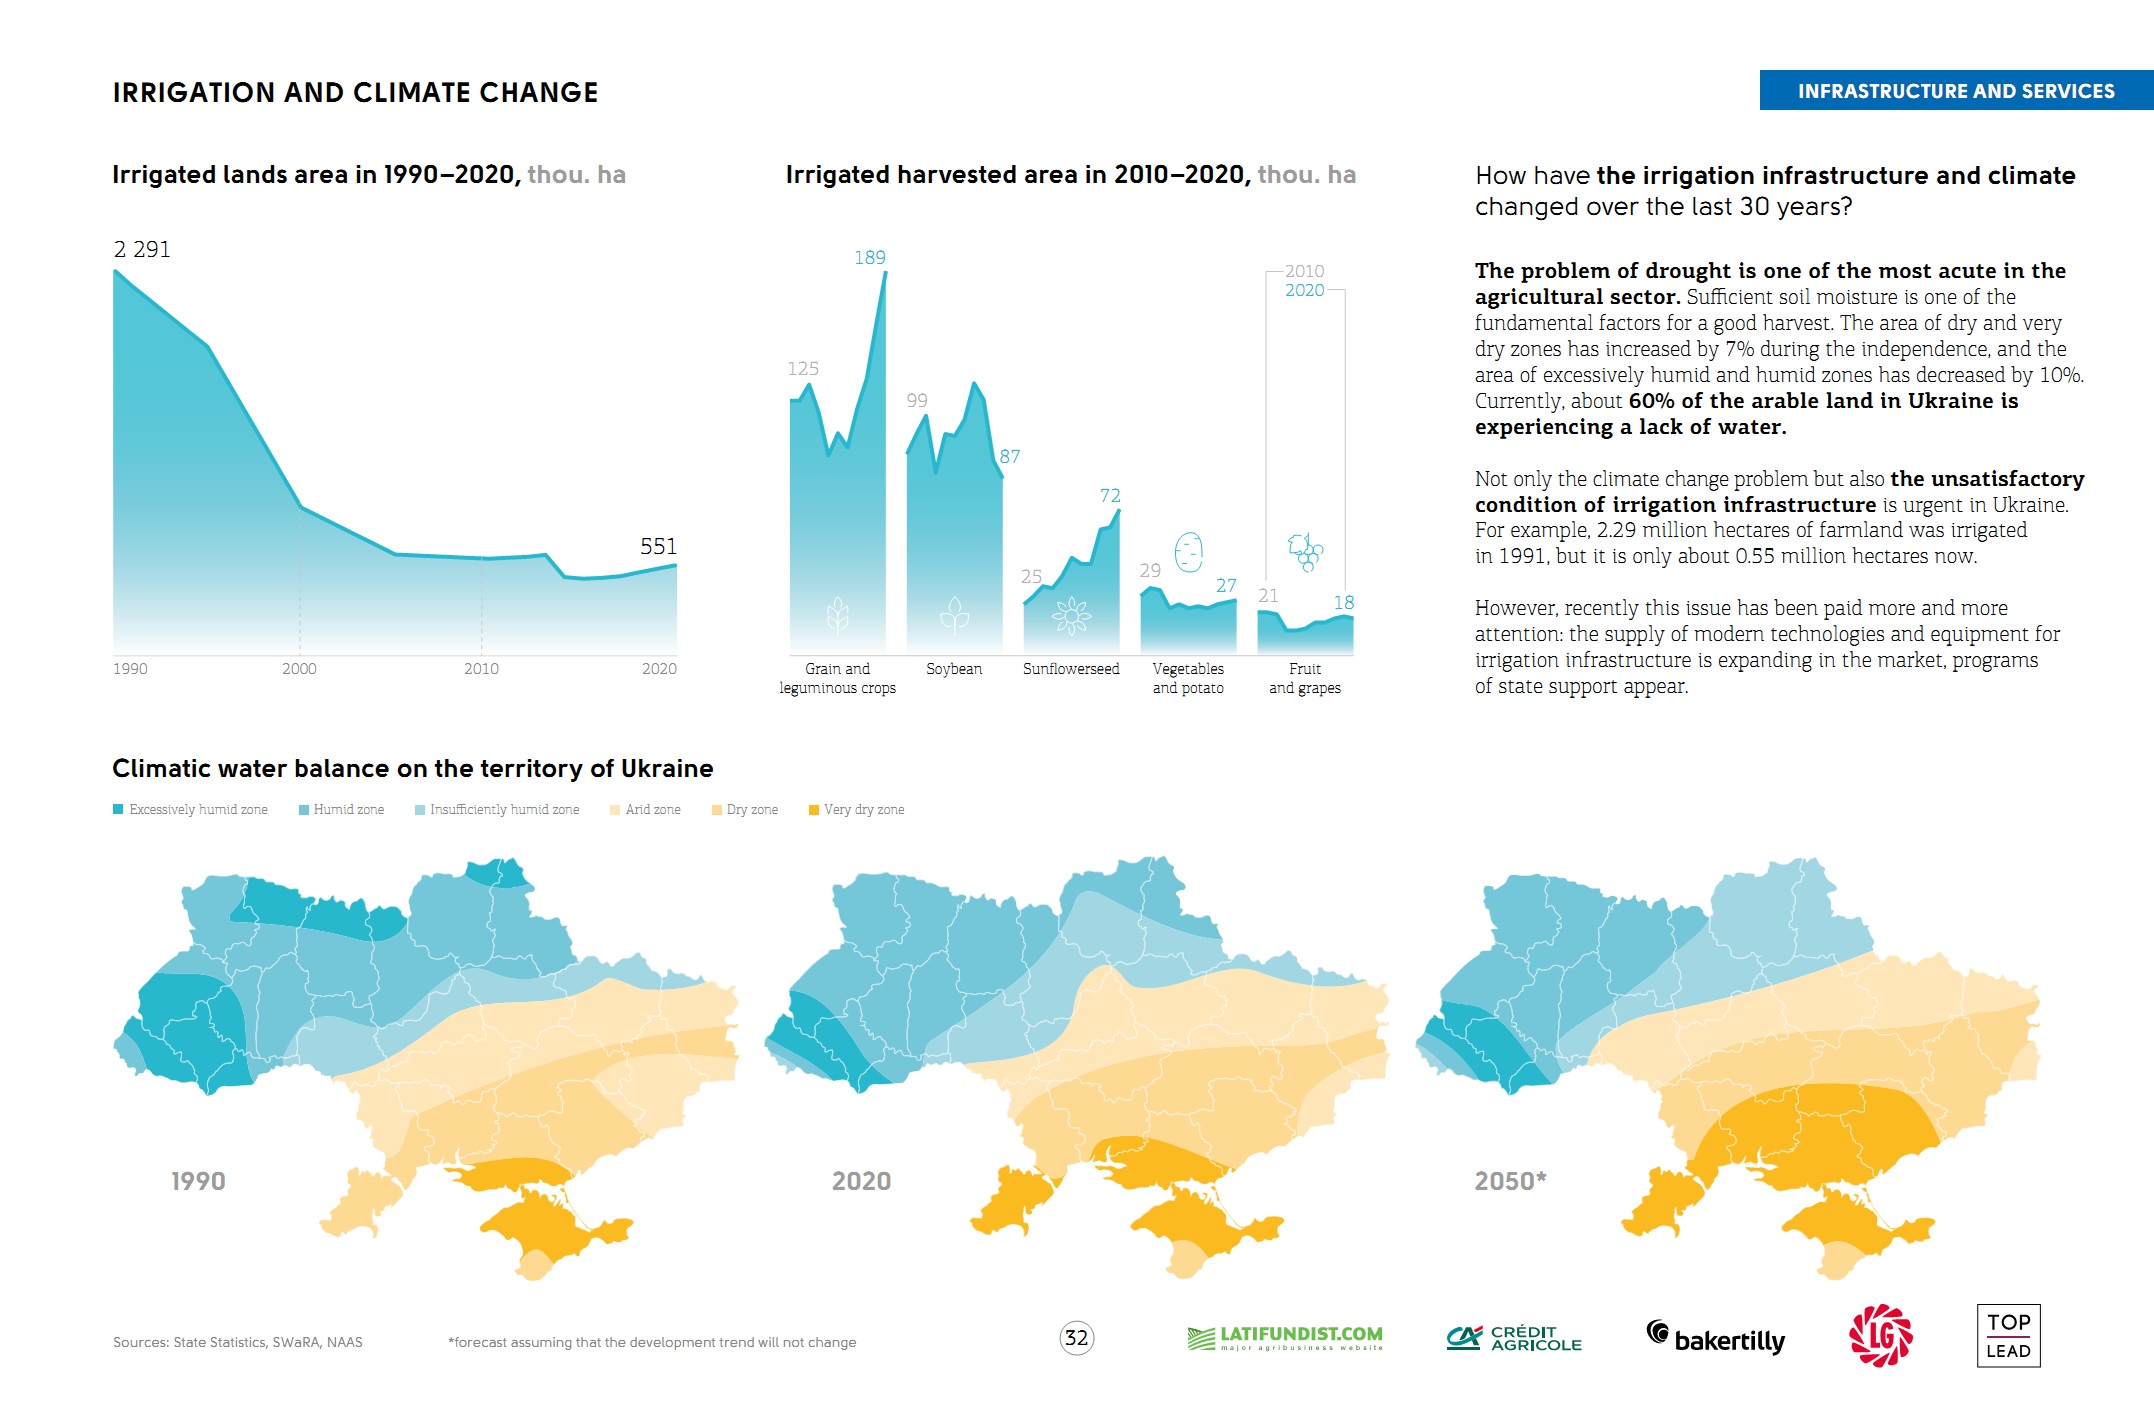 Irrigation systems and climate change in Ukraine (click for higher resolution)